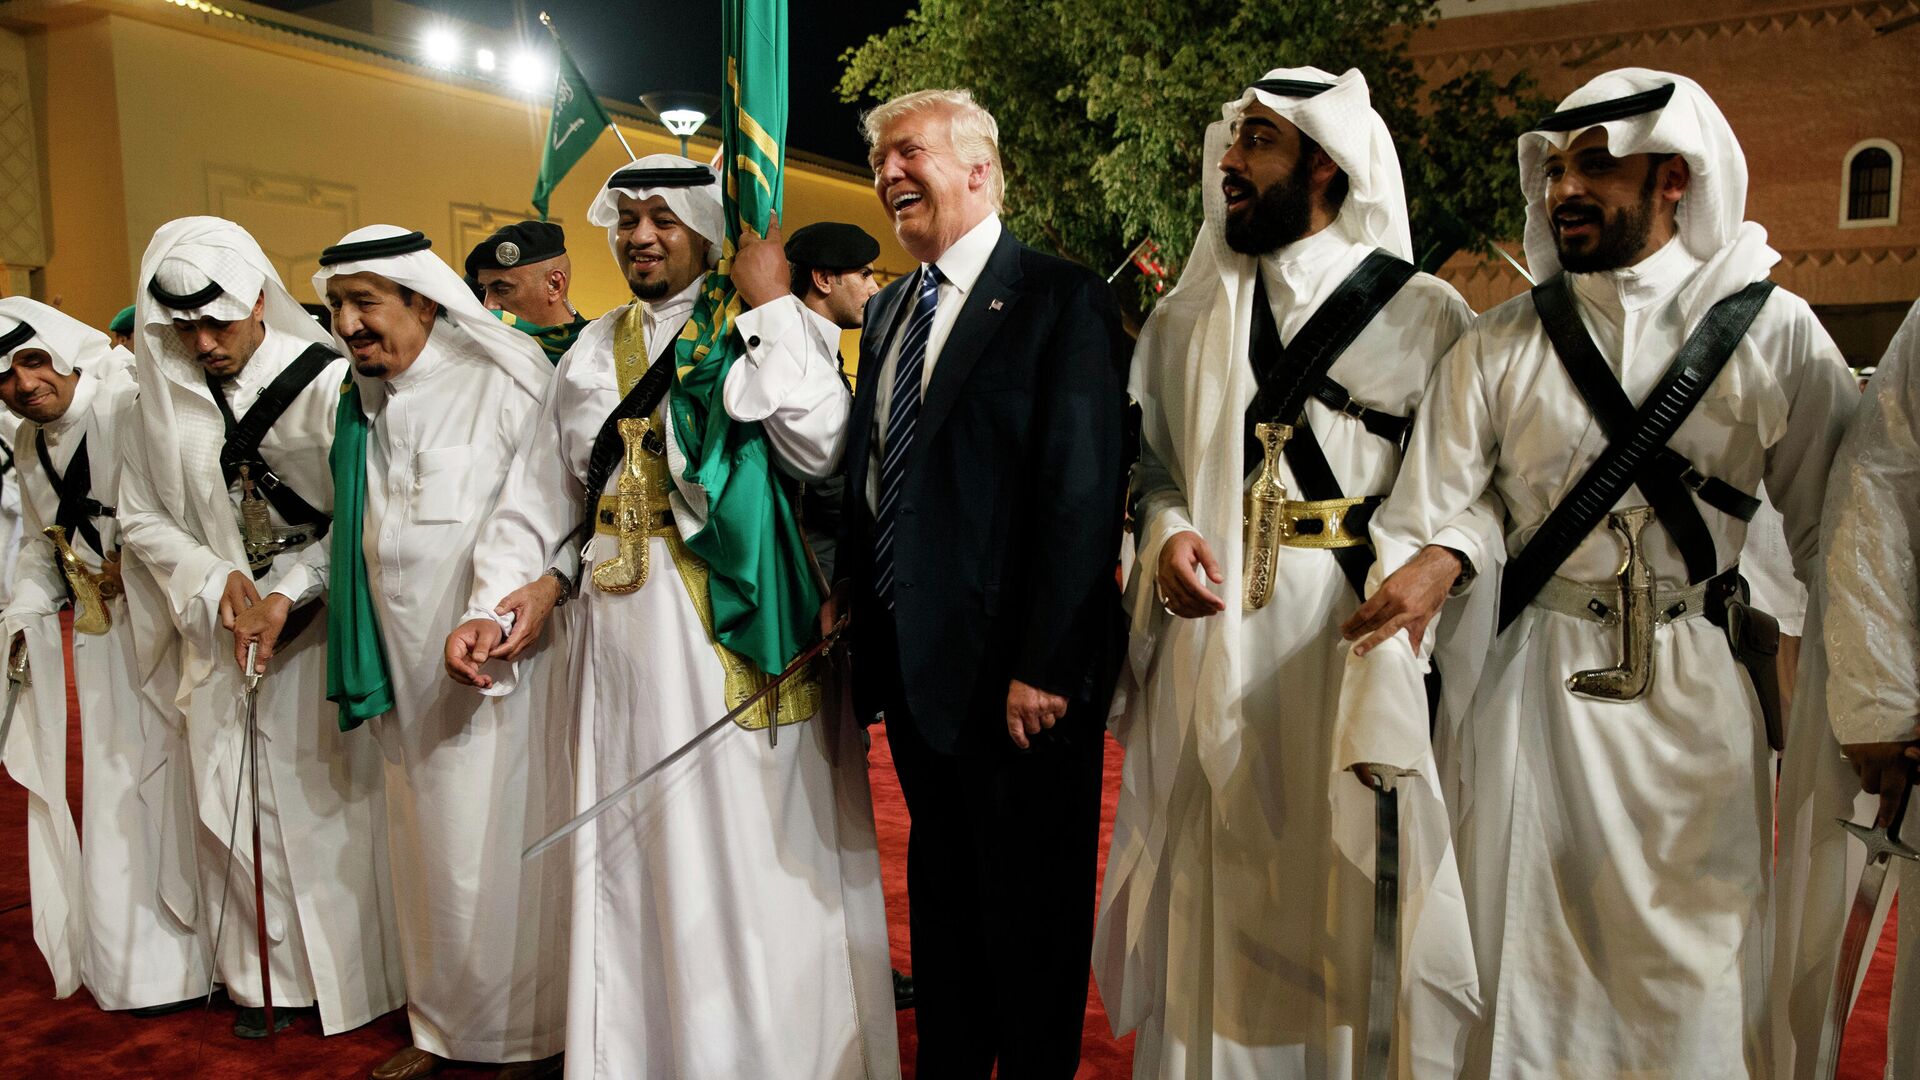 In this May 20, 2017 file photo, U.S. President Donald Trump holds a sword and dances with traditional dancers during a welcome ceremony at Murabba Palace, in Riyadh. - Sputnik International, 1920, 12.10.2021